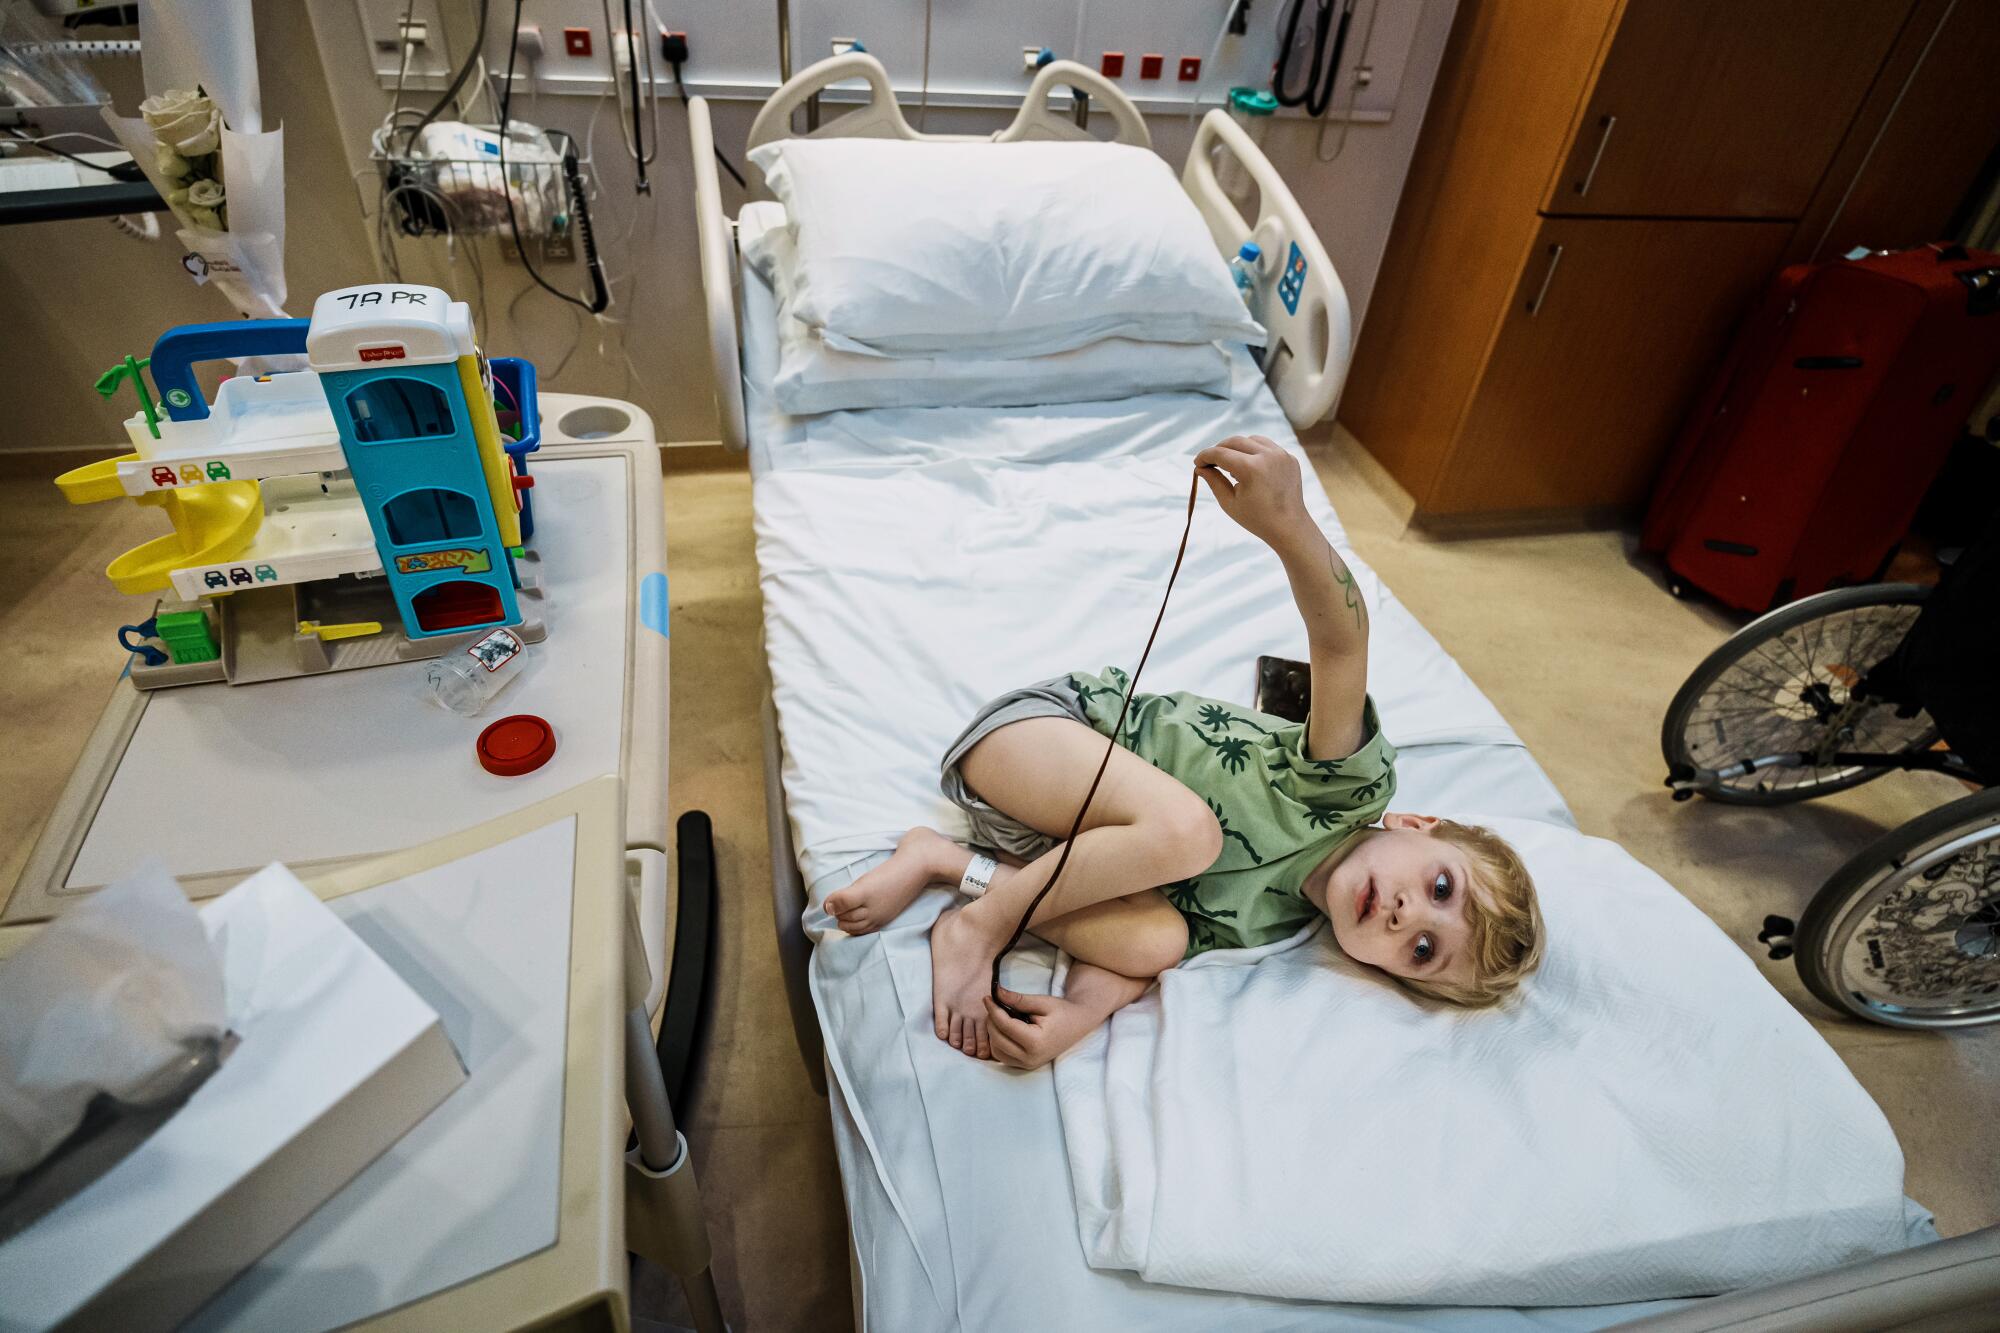 A 5-year-old curls up at the foot of a hospital bed 